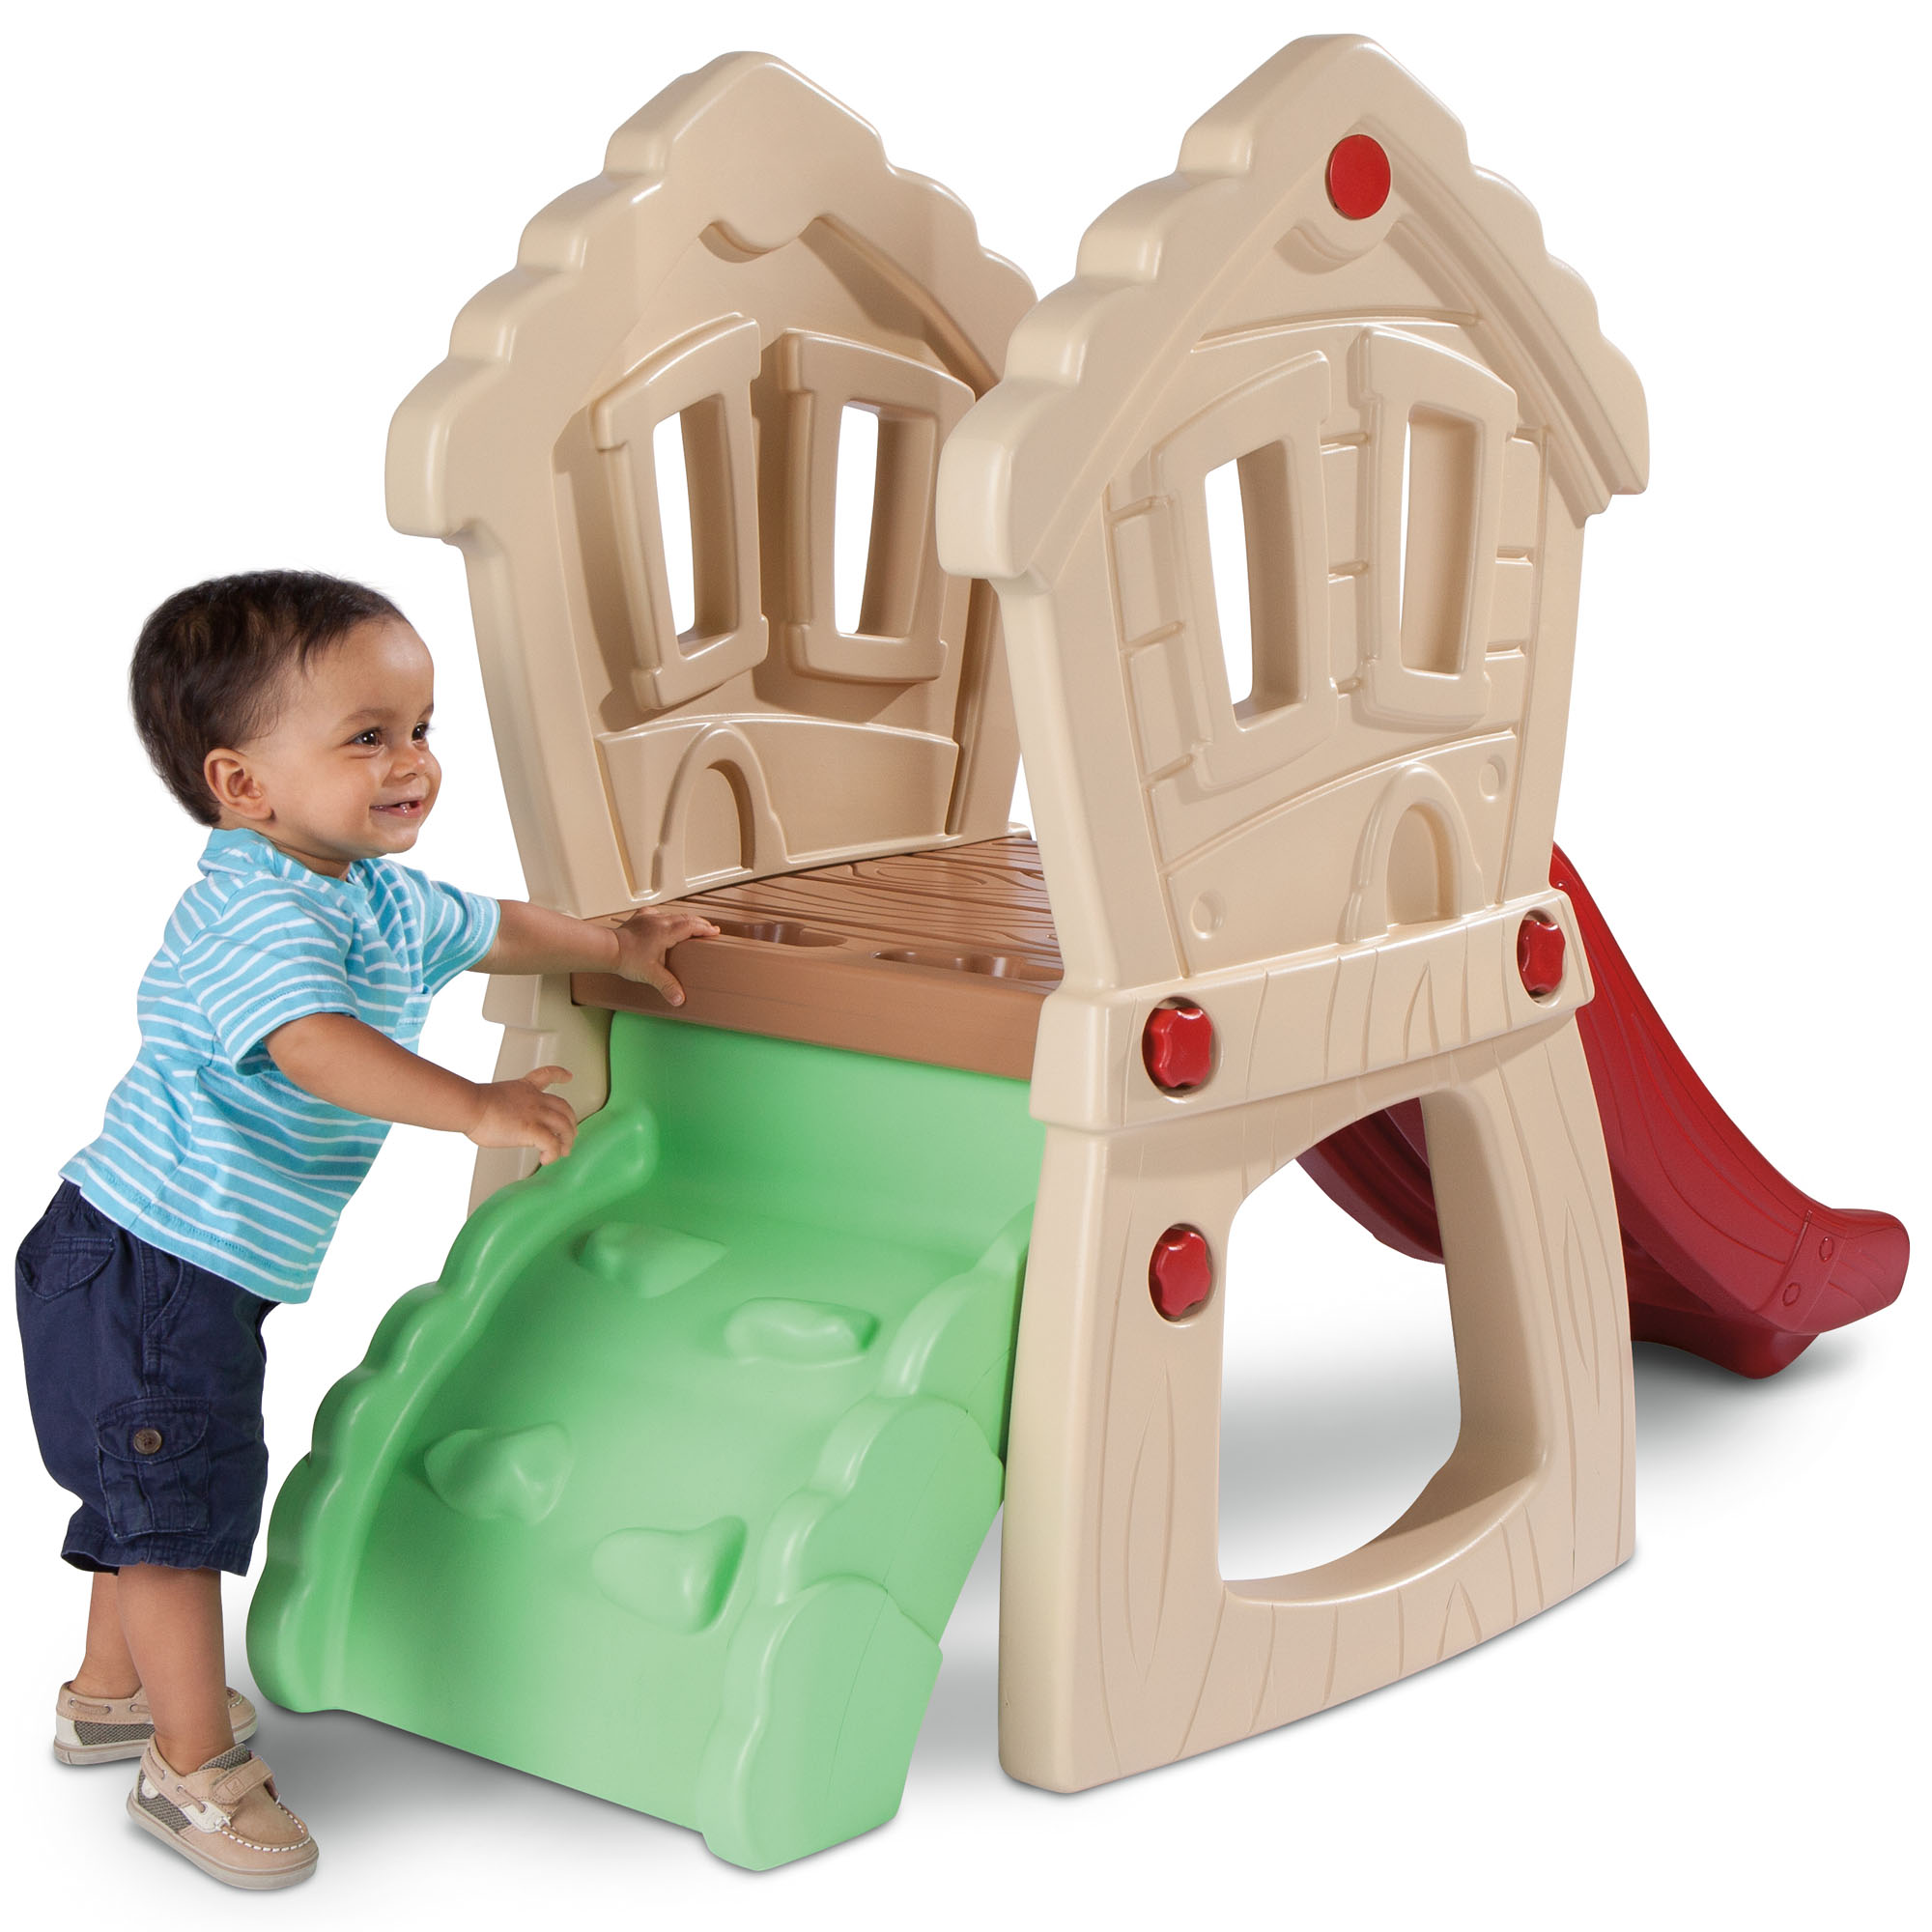 Little Tikes Hide & Seek Climber, Indoor Outdoor Slide and Climbing Playset for Kids Ages 2-5 - image 4 of 6